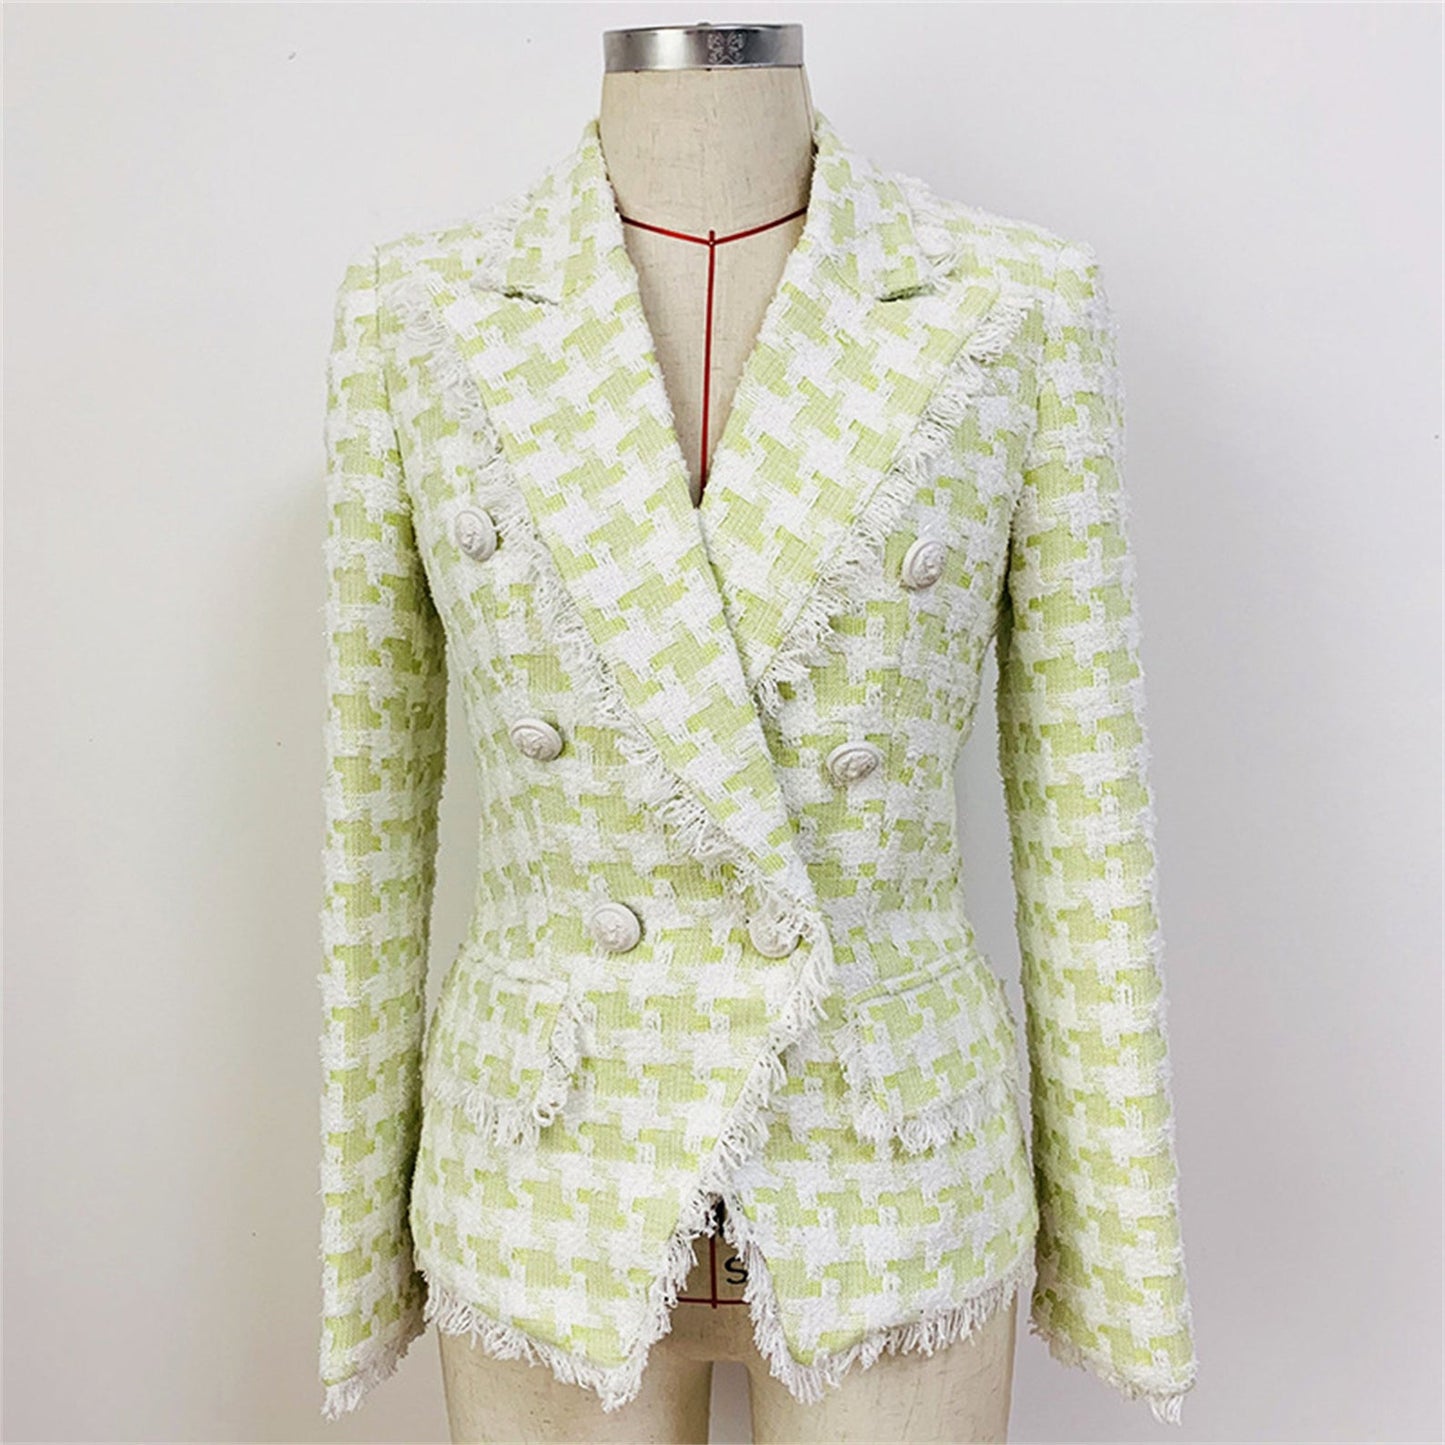 Green Blazer Checked Tweed Unique Style For Women  UK CUSTOMER SERVICE!  Green Blazer Checked Tweed Unique Style For Women-  Board of wearing same style of Blazer?.We have unique style Blazer with Shorts. Top Quality. Designed with front tassel. This double breasted blazer is a chic trans-seasonal wardrobe essential. Designed to create a sharp tailored silhouette worn open or closed. Fully lined with a luxury stretch lining for extra comfort.